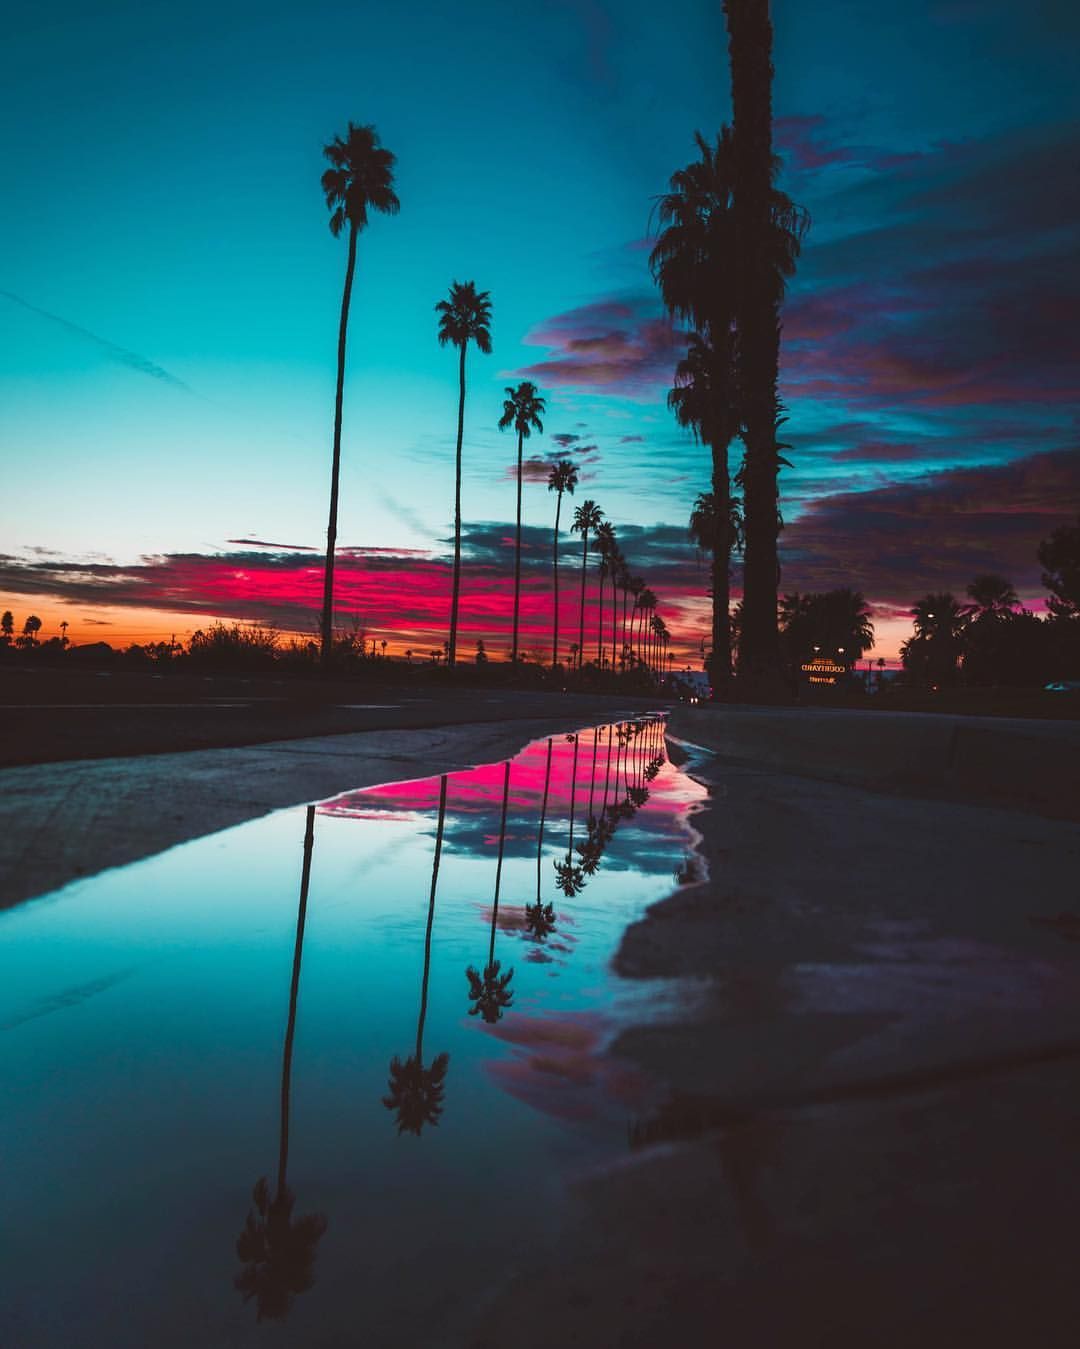 Views during sunrise in Palm Springs, California. Nature